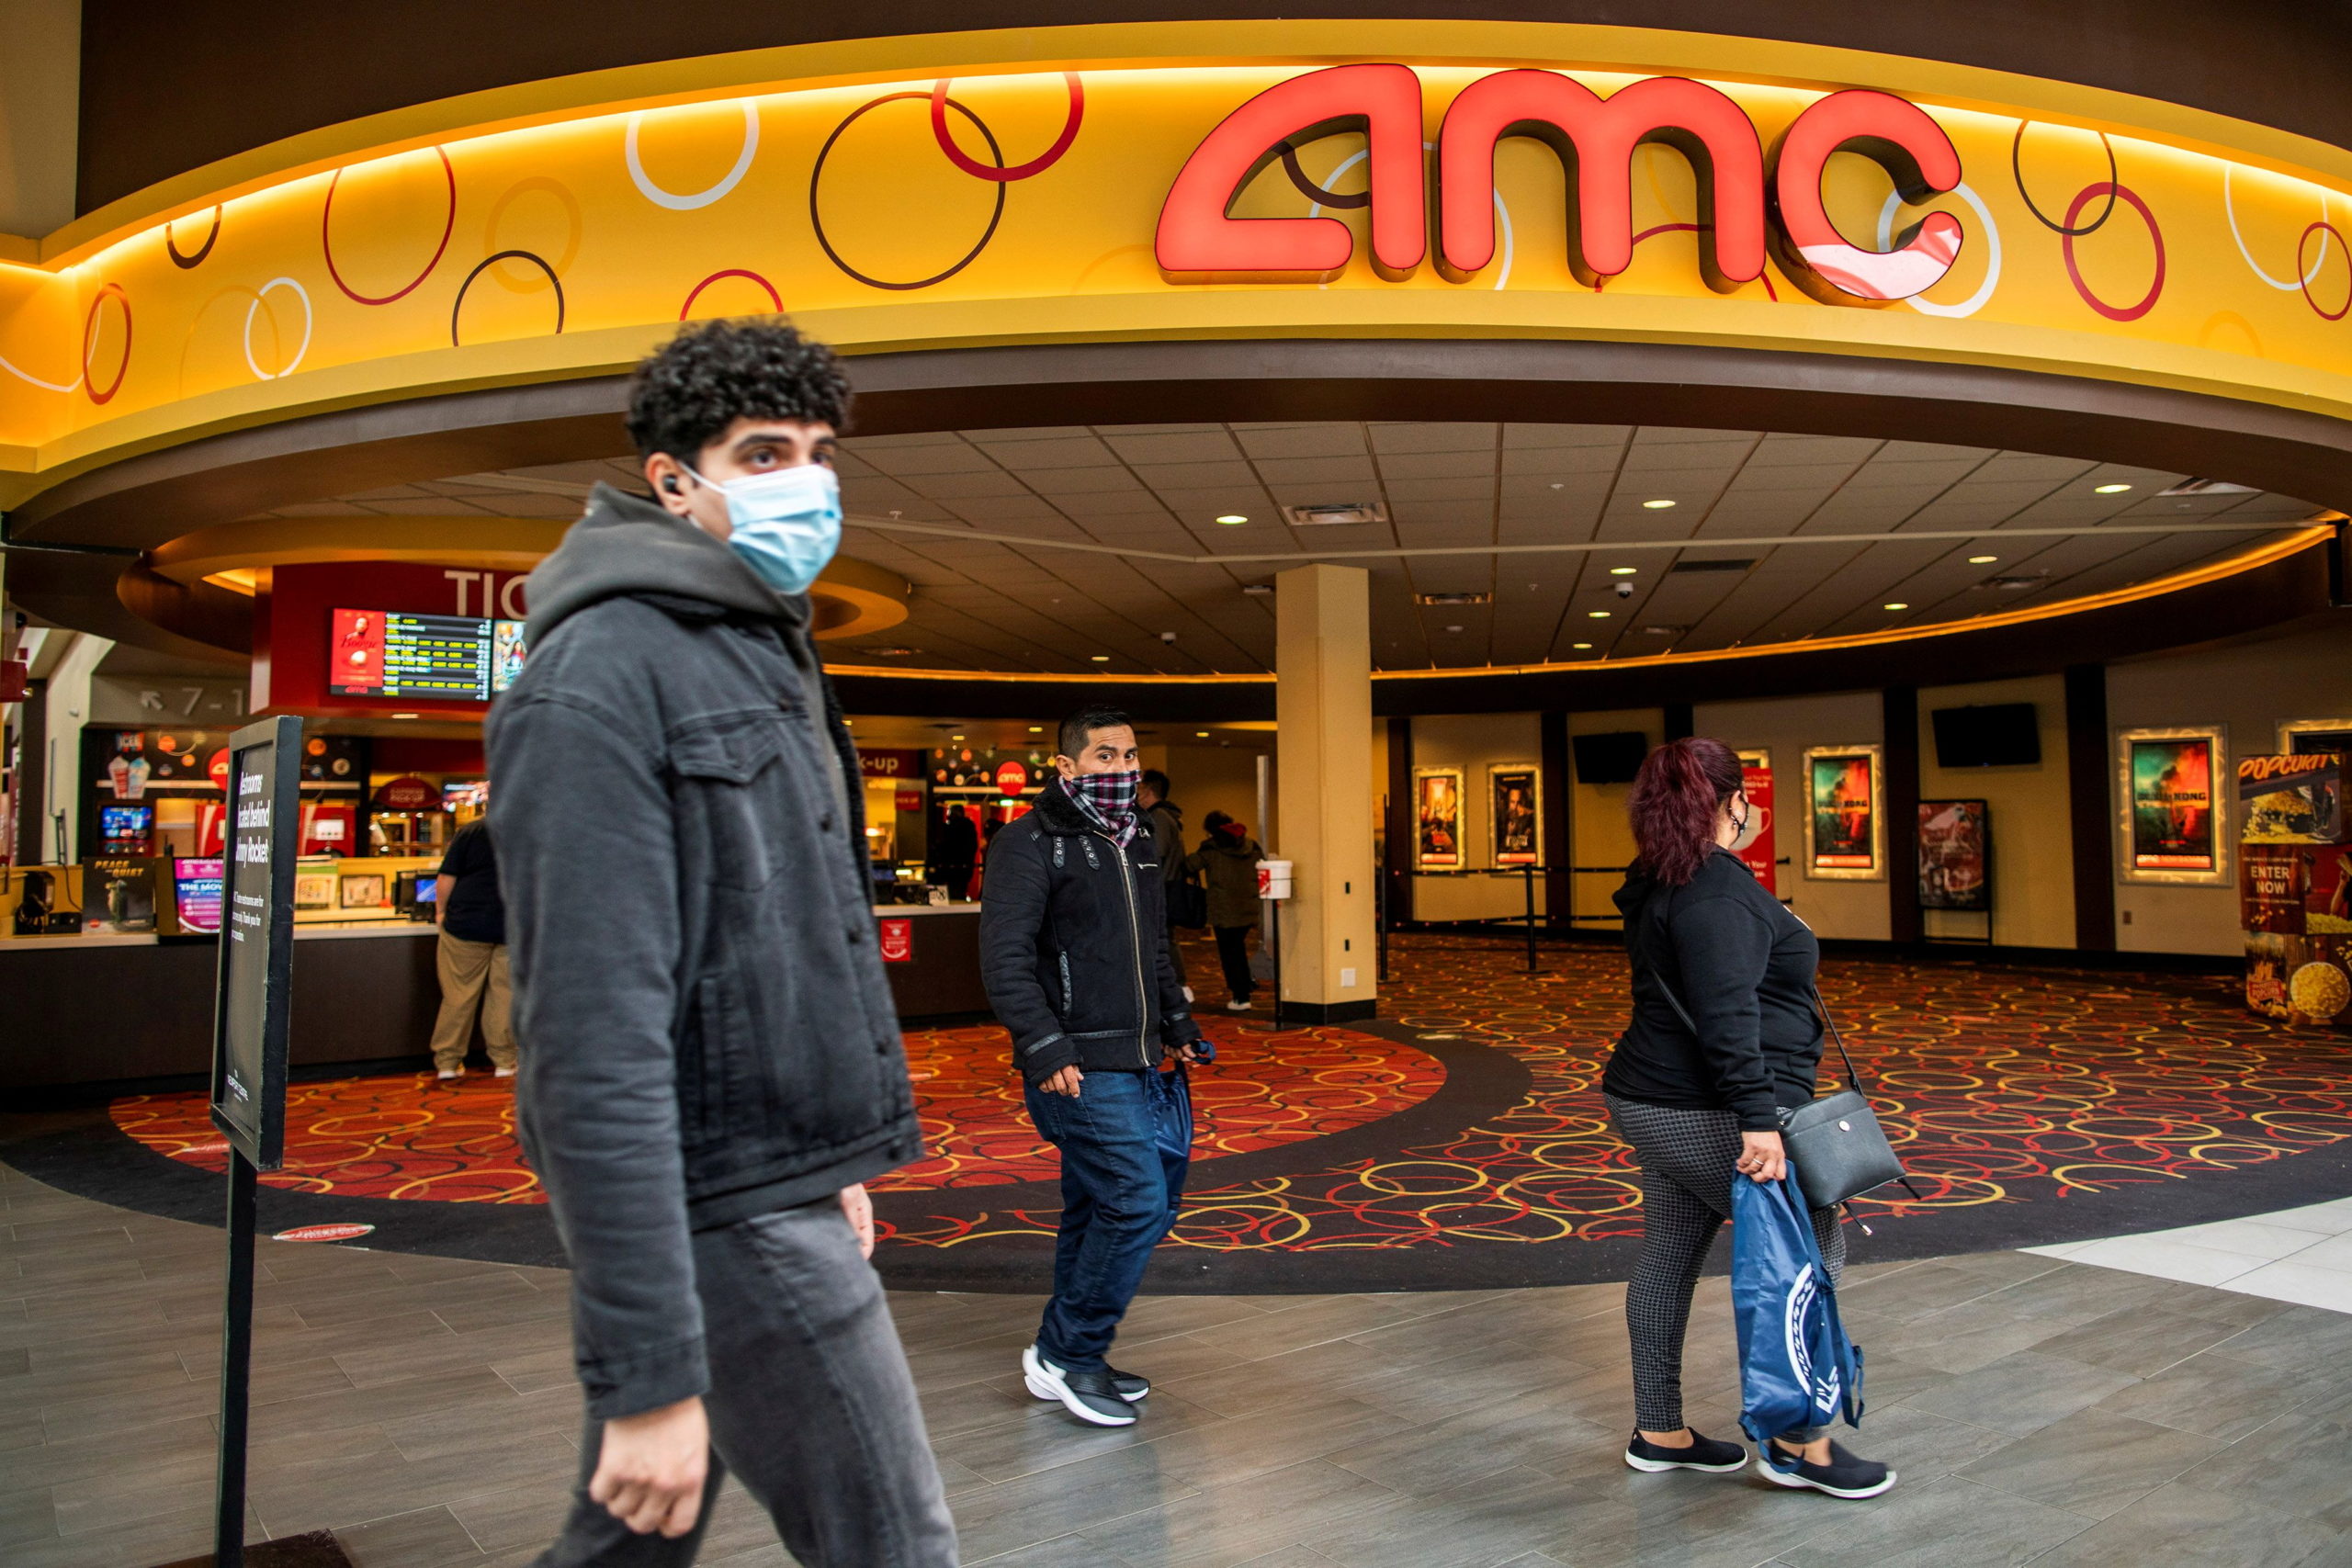 People wear face masks as they walk by a movie theater during the coronavirus disease (COVID-19) pandemic in Newport, New Jersey, U.S., April 2, 2021. REUTERS/Eduardo Munoz/File Photo